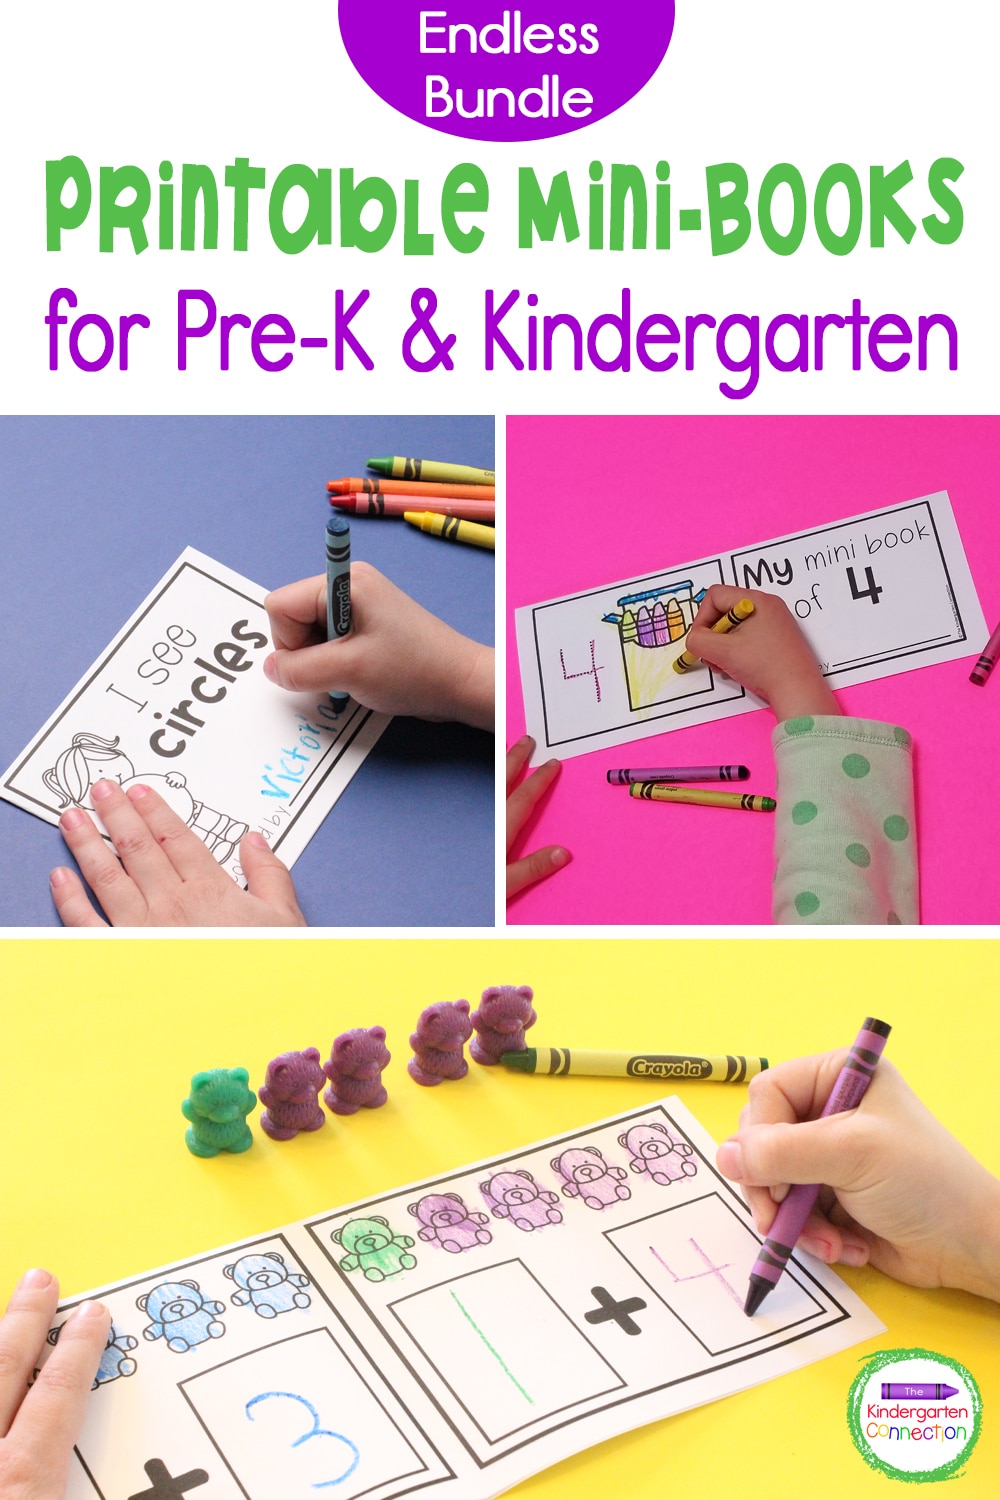 With this Endless Bundle of Printable Mini-Books for Pre-K & Kindergarten, you will have an engaging, easy-prep mini-book for any lesson!